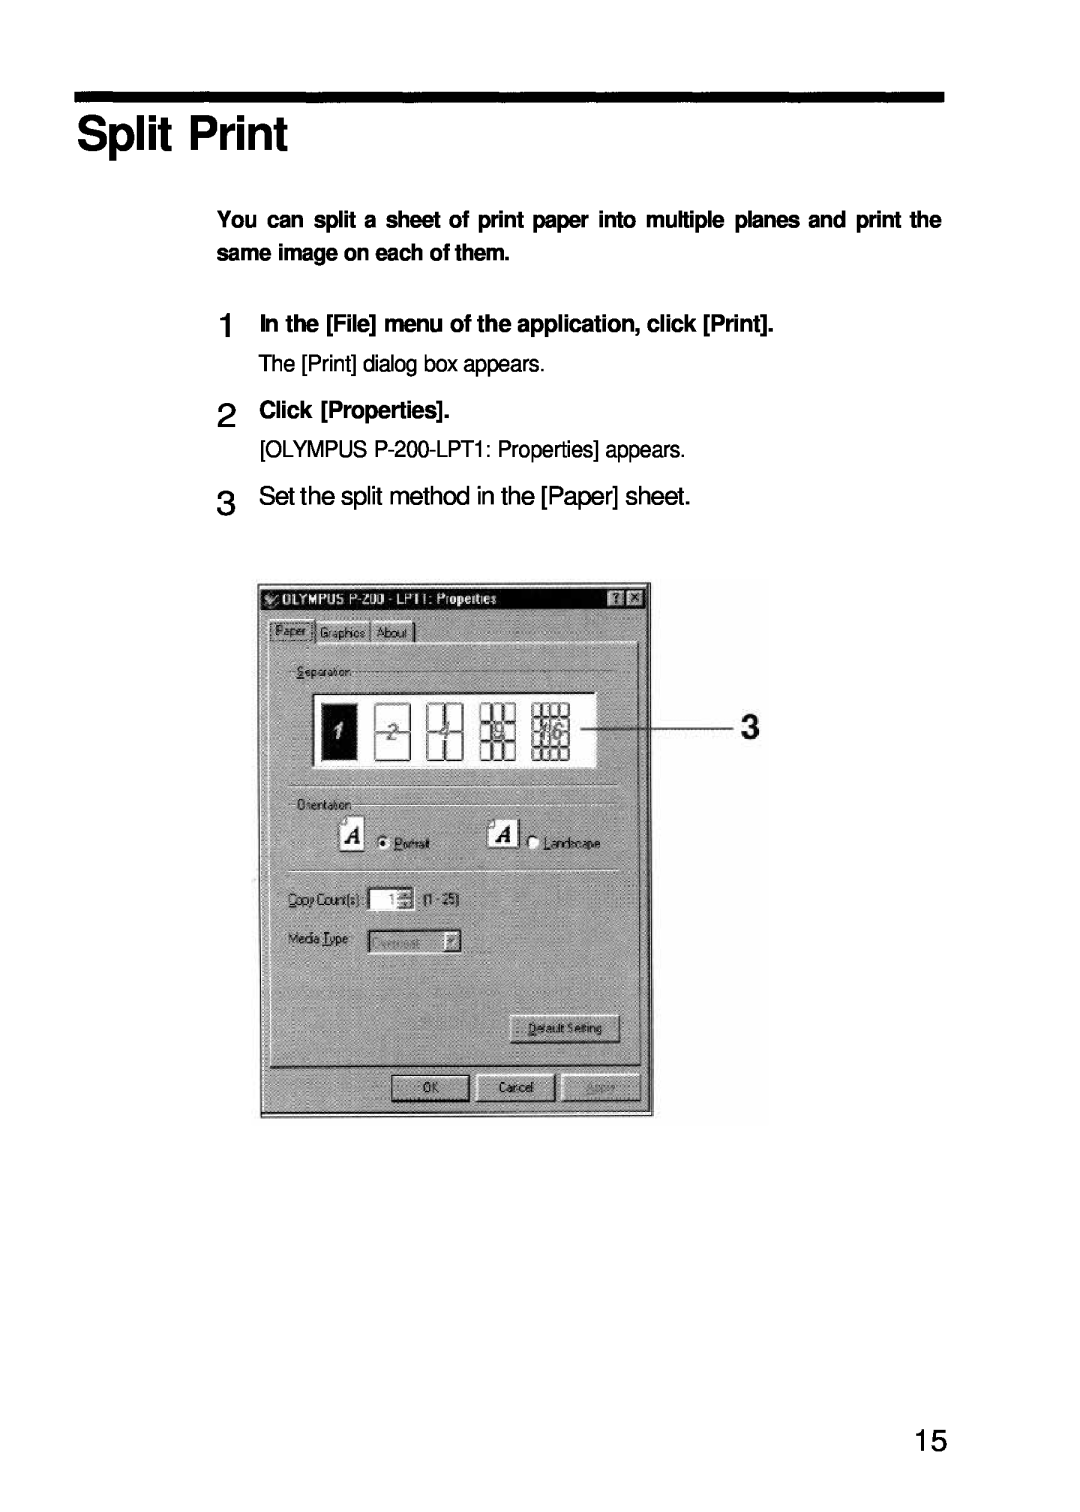 Olympus P-200 Split Print, In the File menu of the application, click Print, Click Properties, same image on each of them 